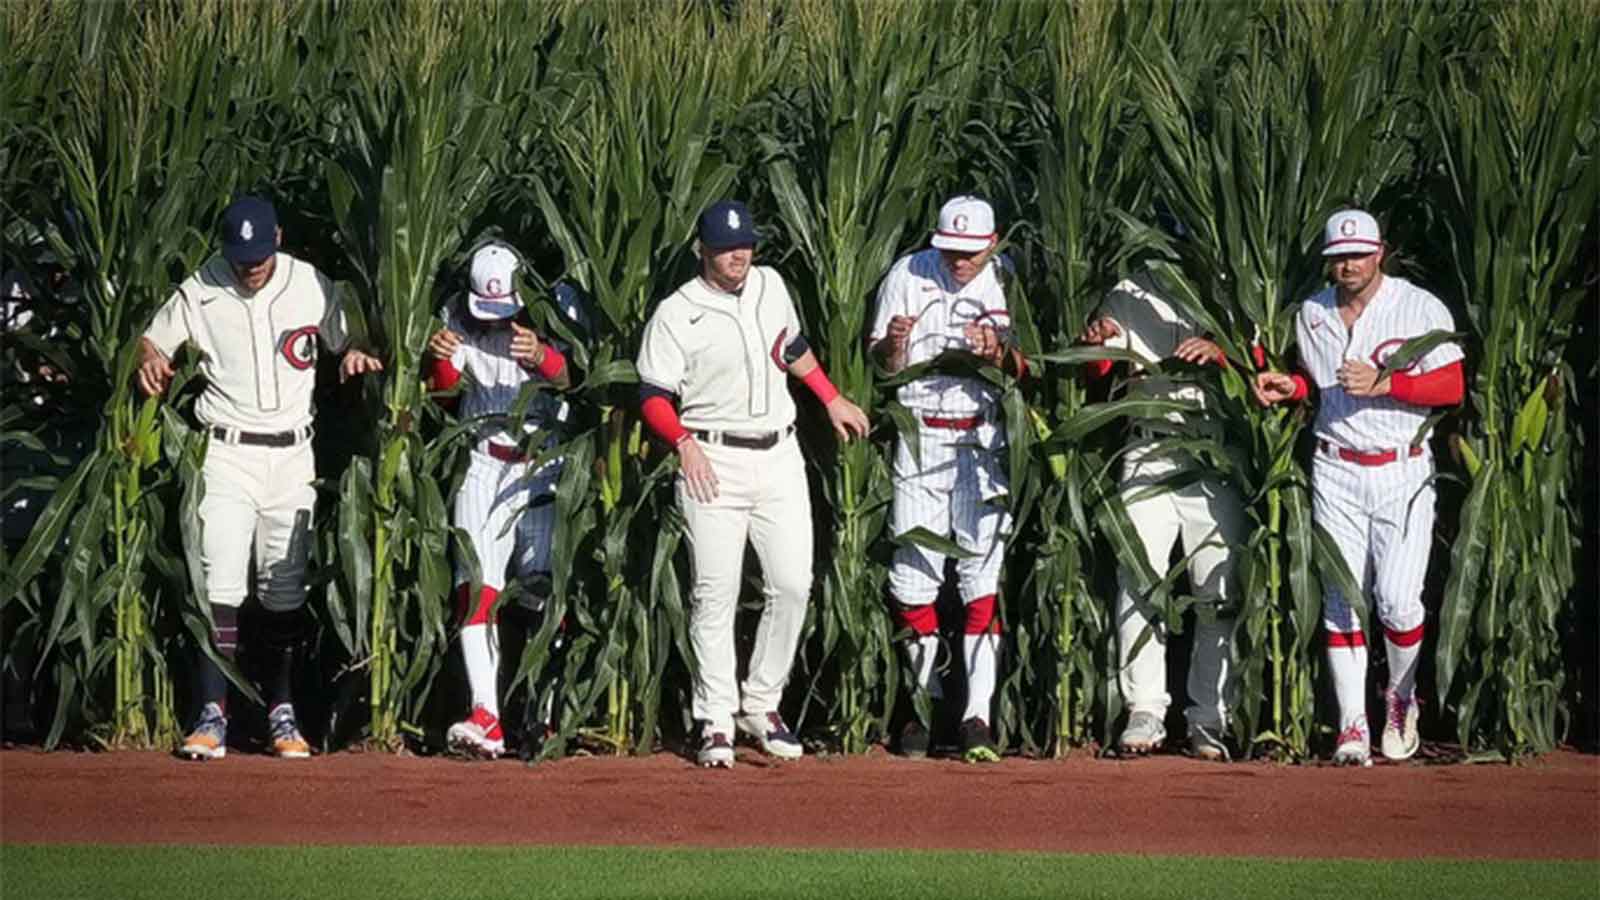 Is there a Field of Dreams Game in 2023 MLB season?